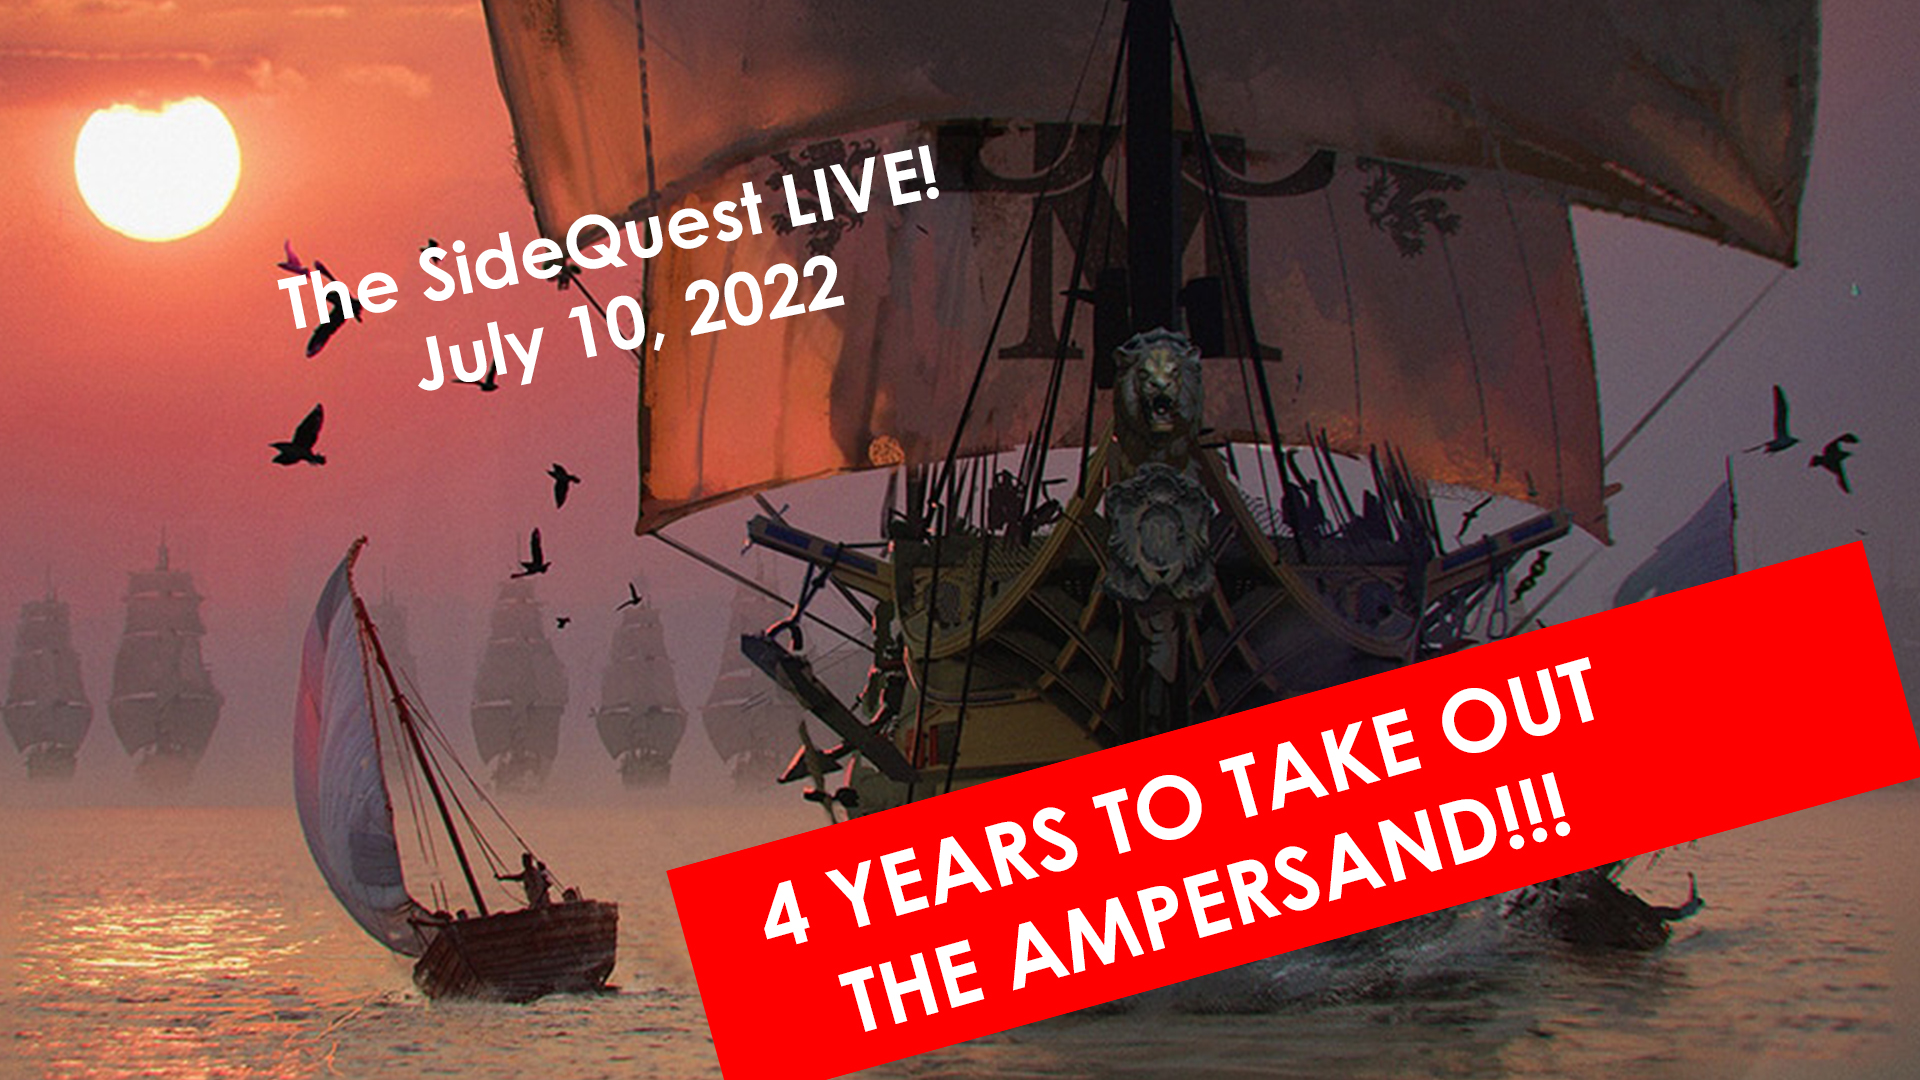 The SideQuest LIVE! July 10, 2022: 4 Years to Take Out the Ampersand